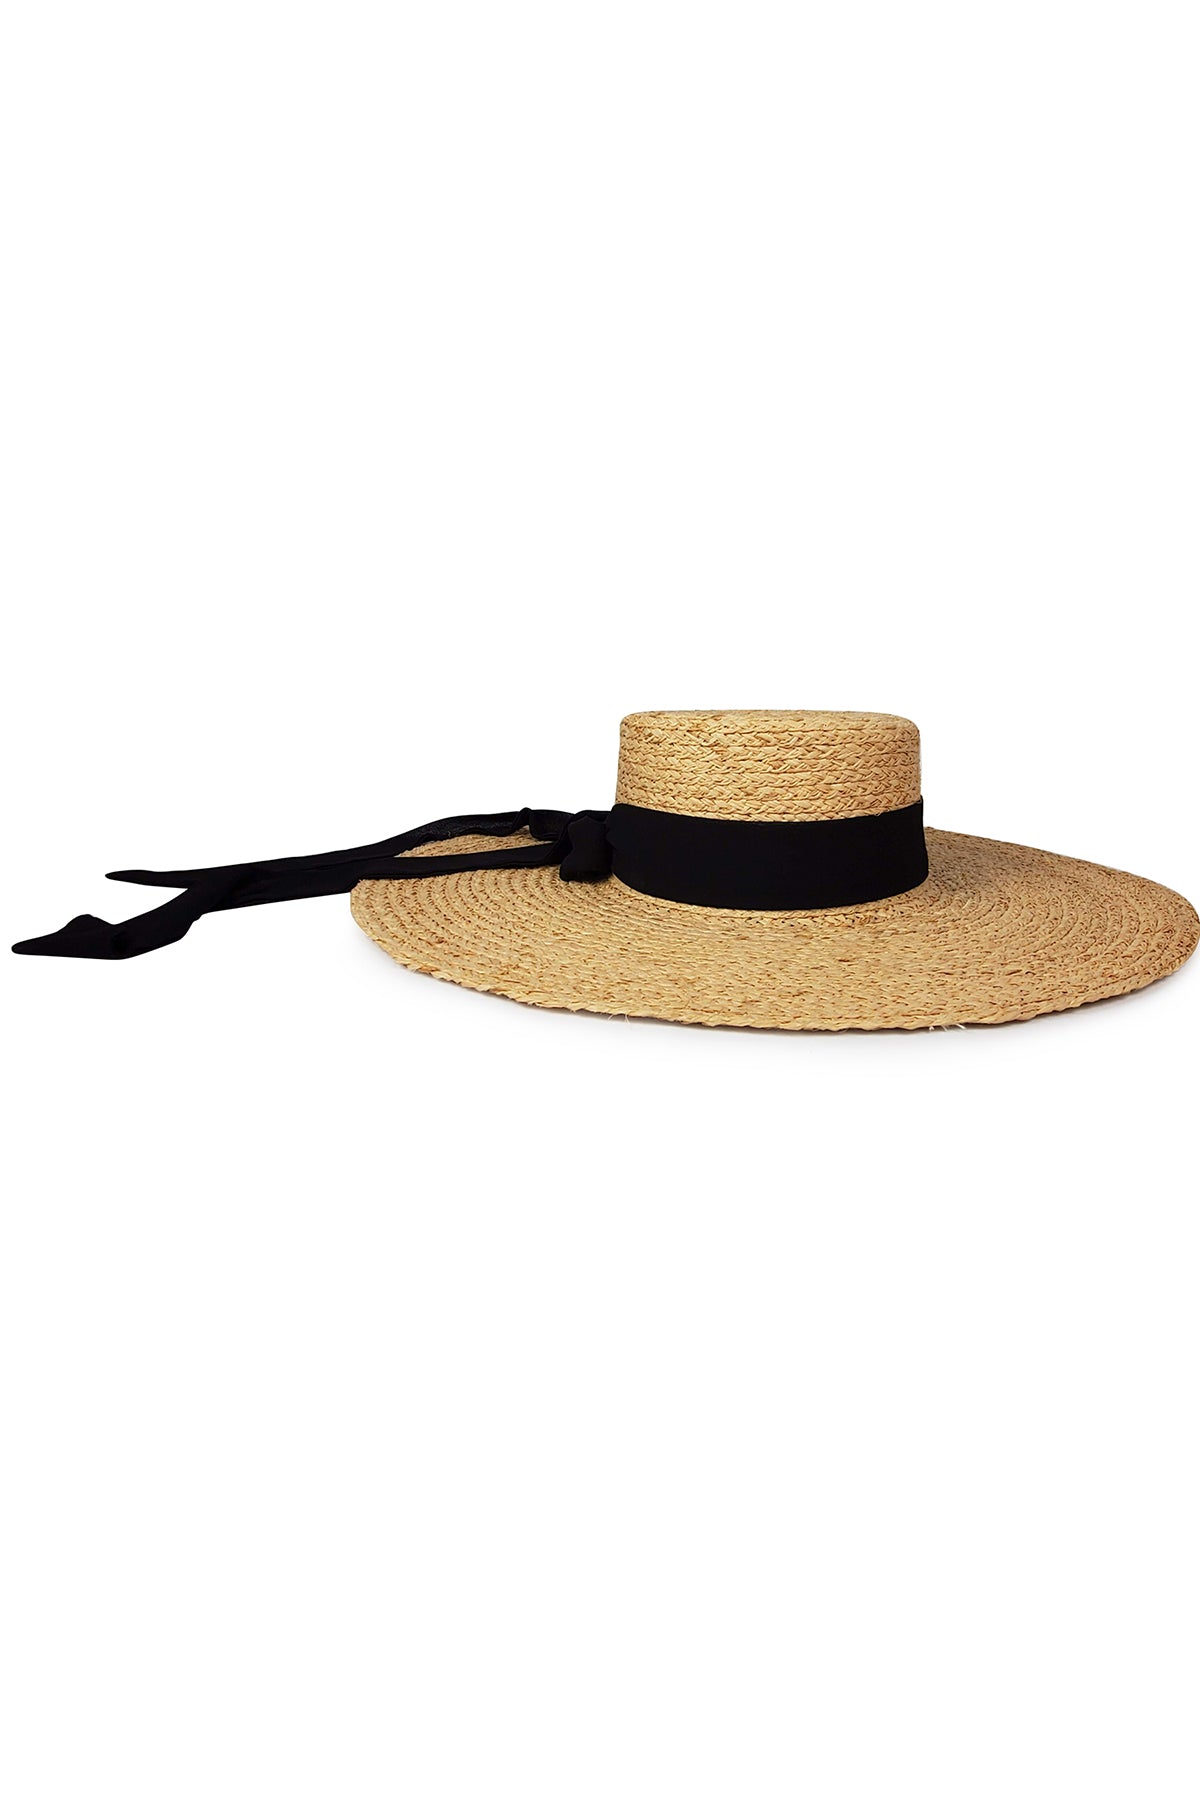   Coco Sunhat Natural with Black Side 